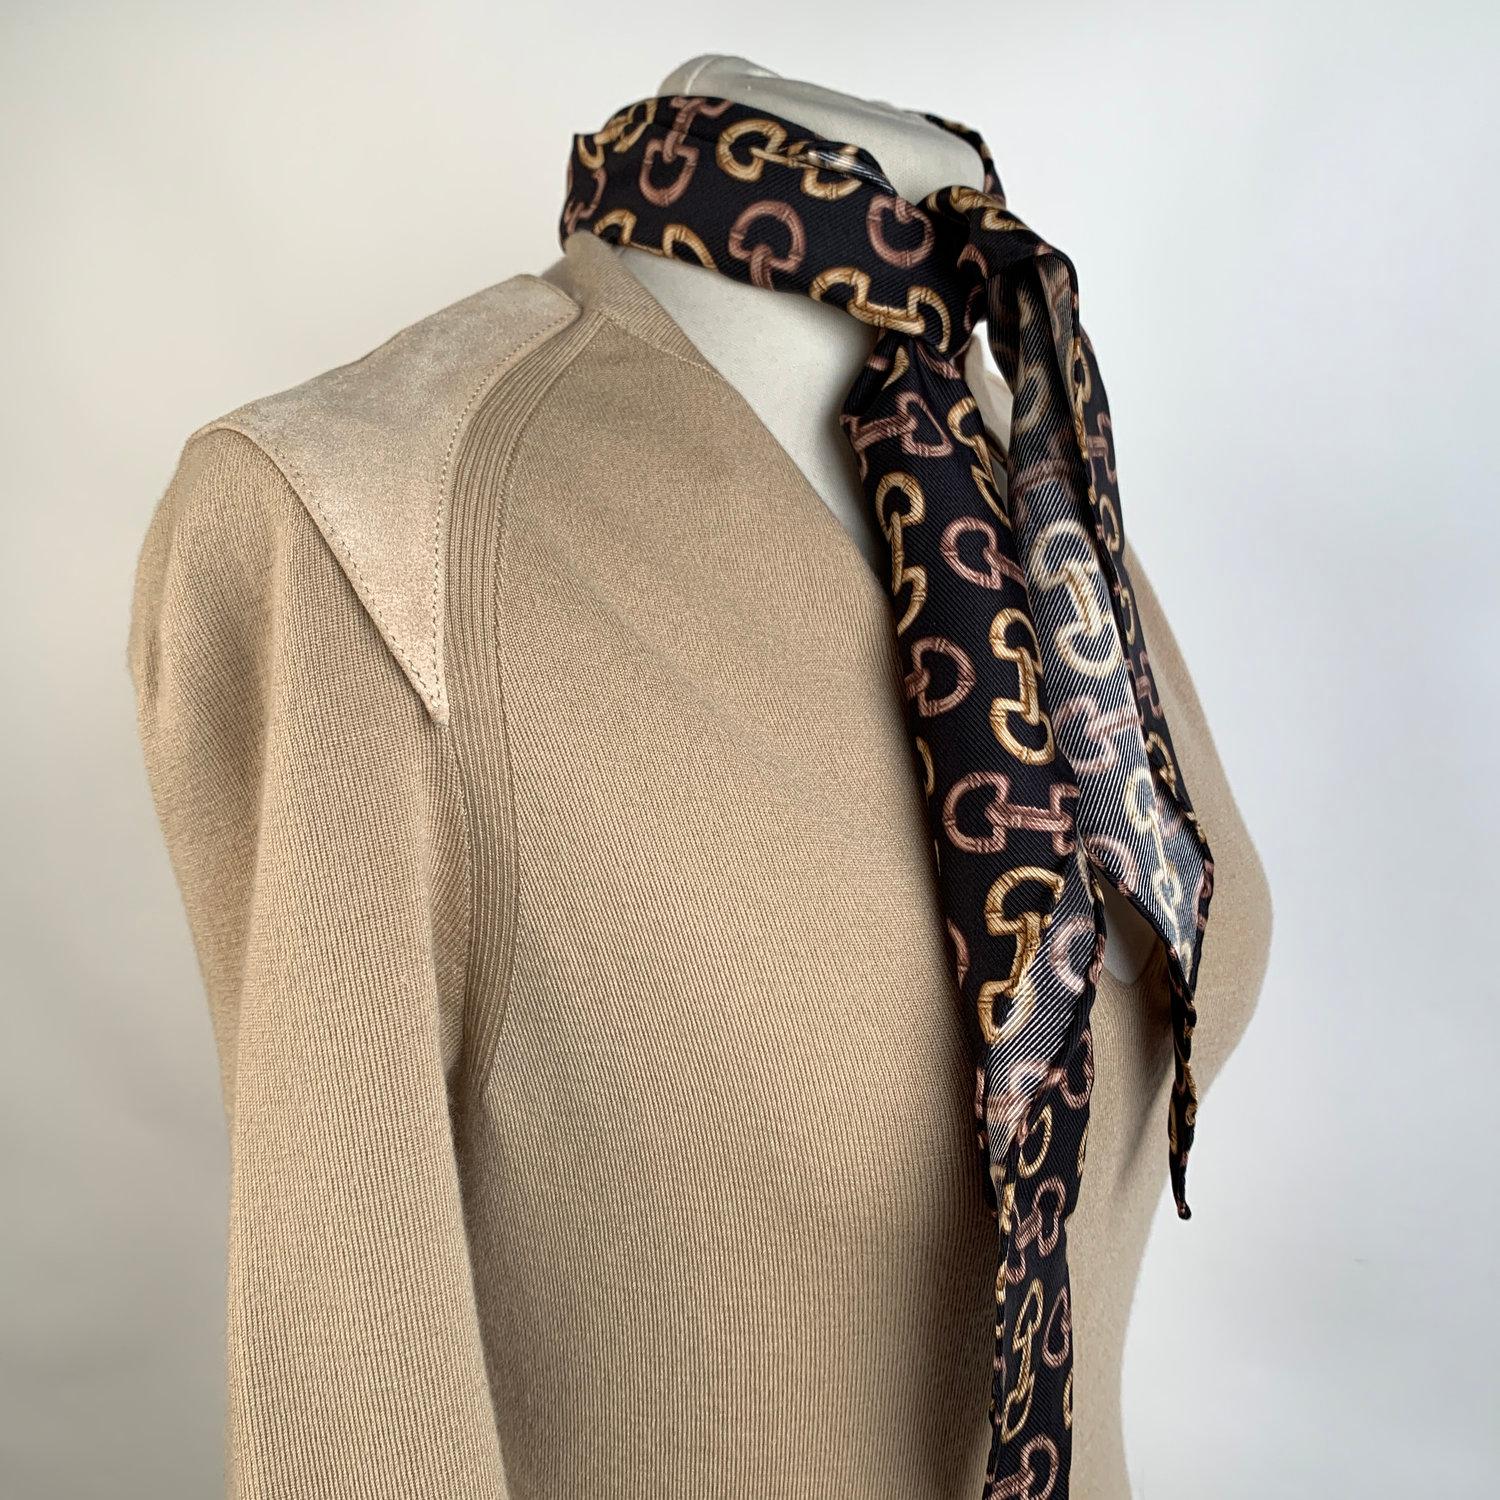 Gucci Beige Cashmere Short Sleeve Jumper Top with Scarf Size S 2